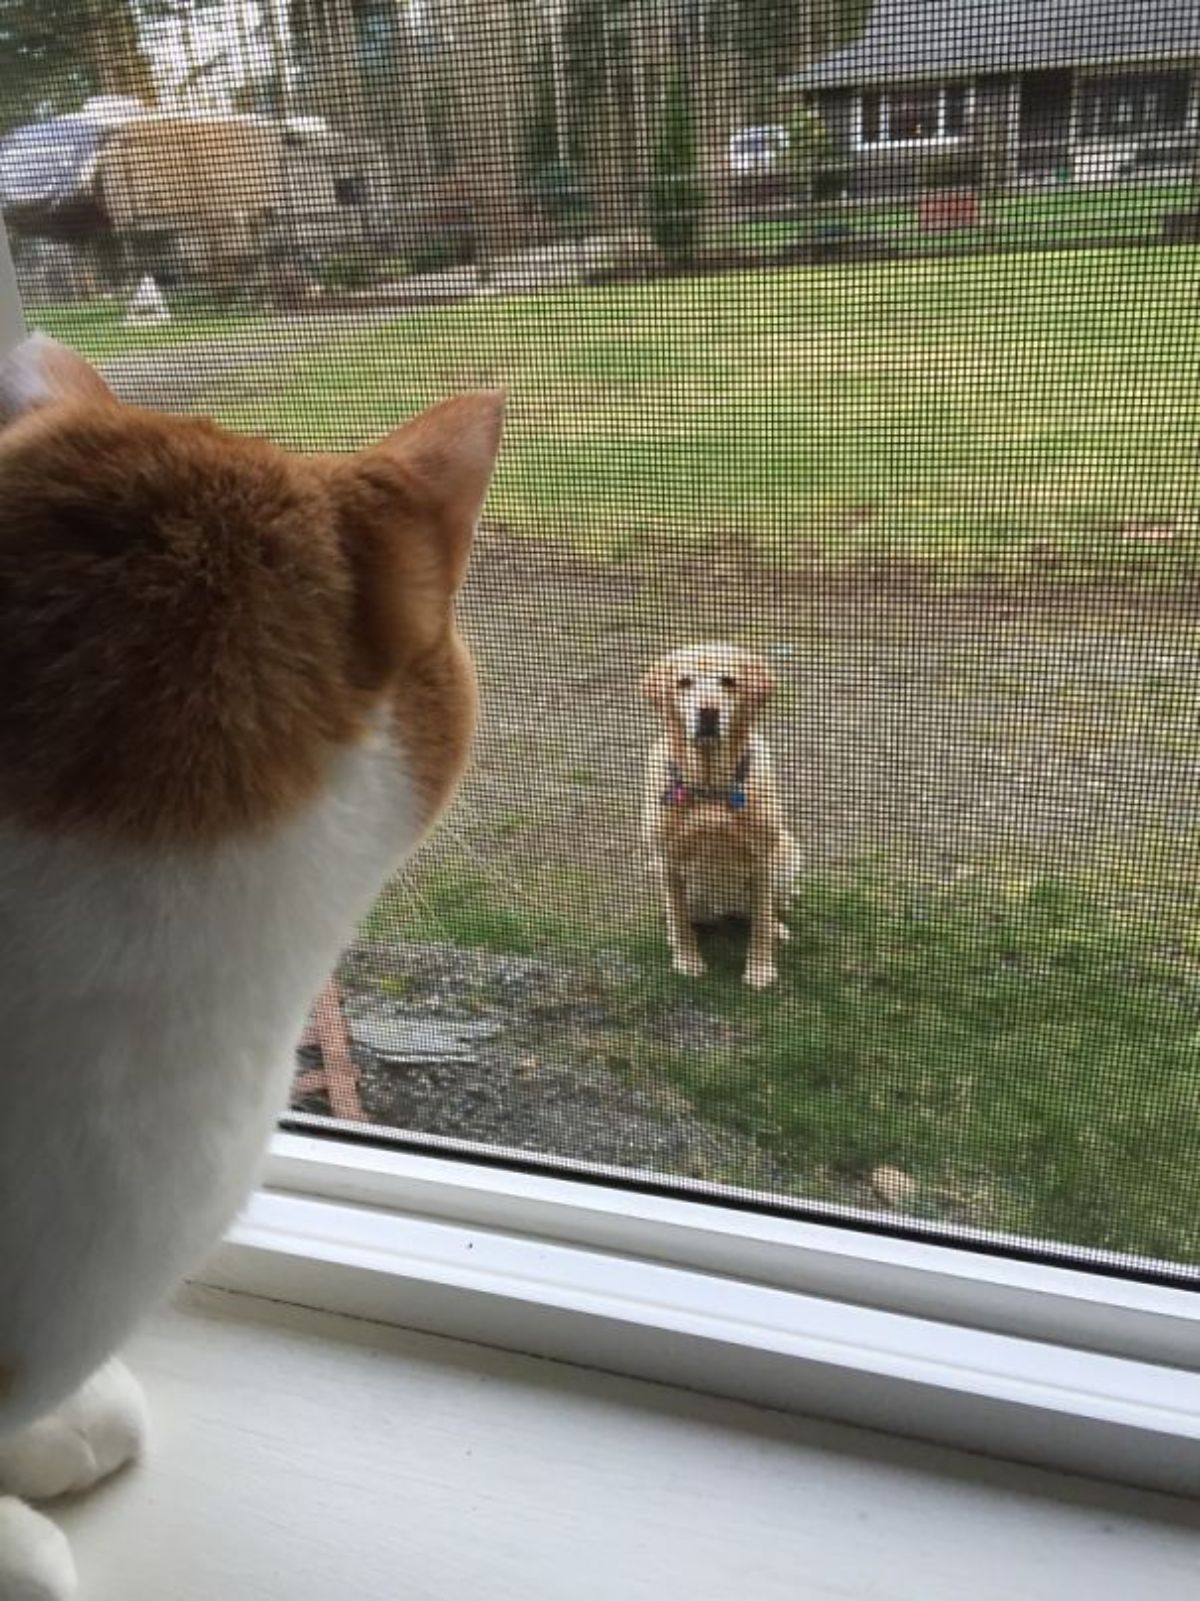 orange and white cat staring at a golden retriever in the yard through a window